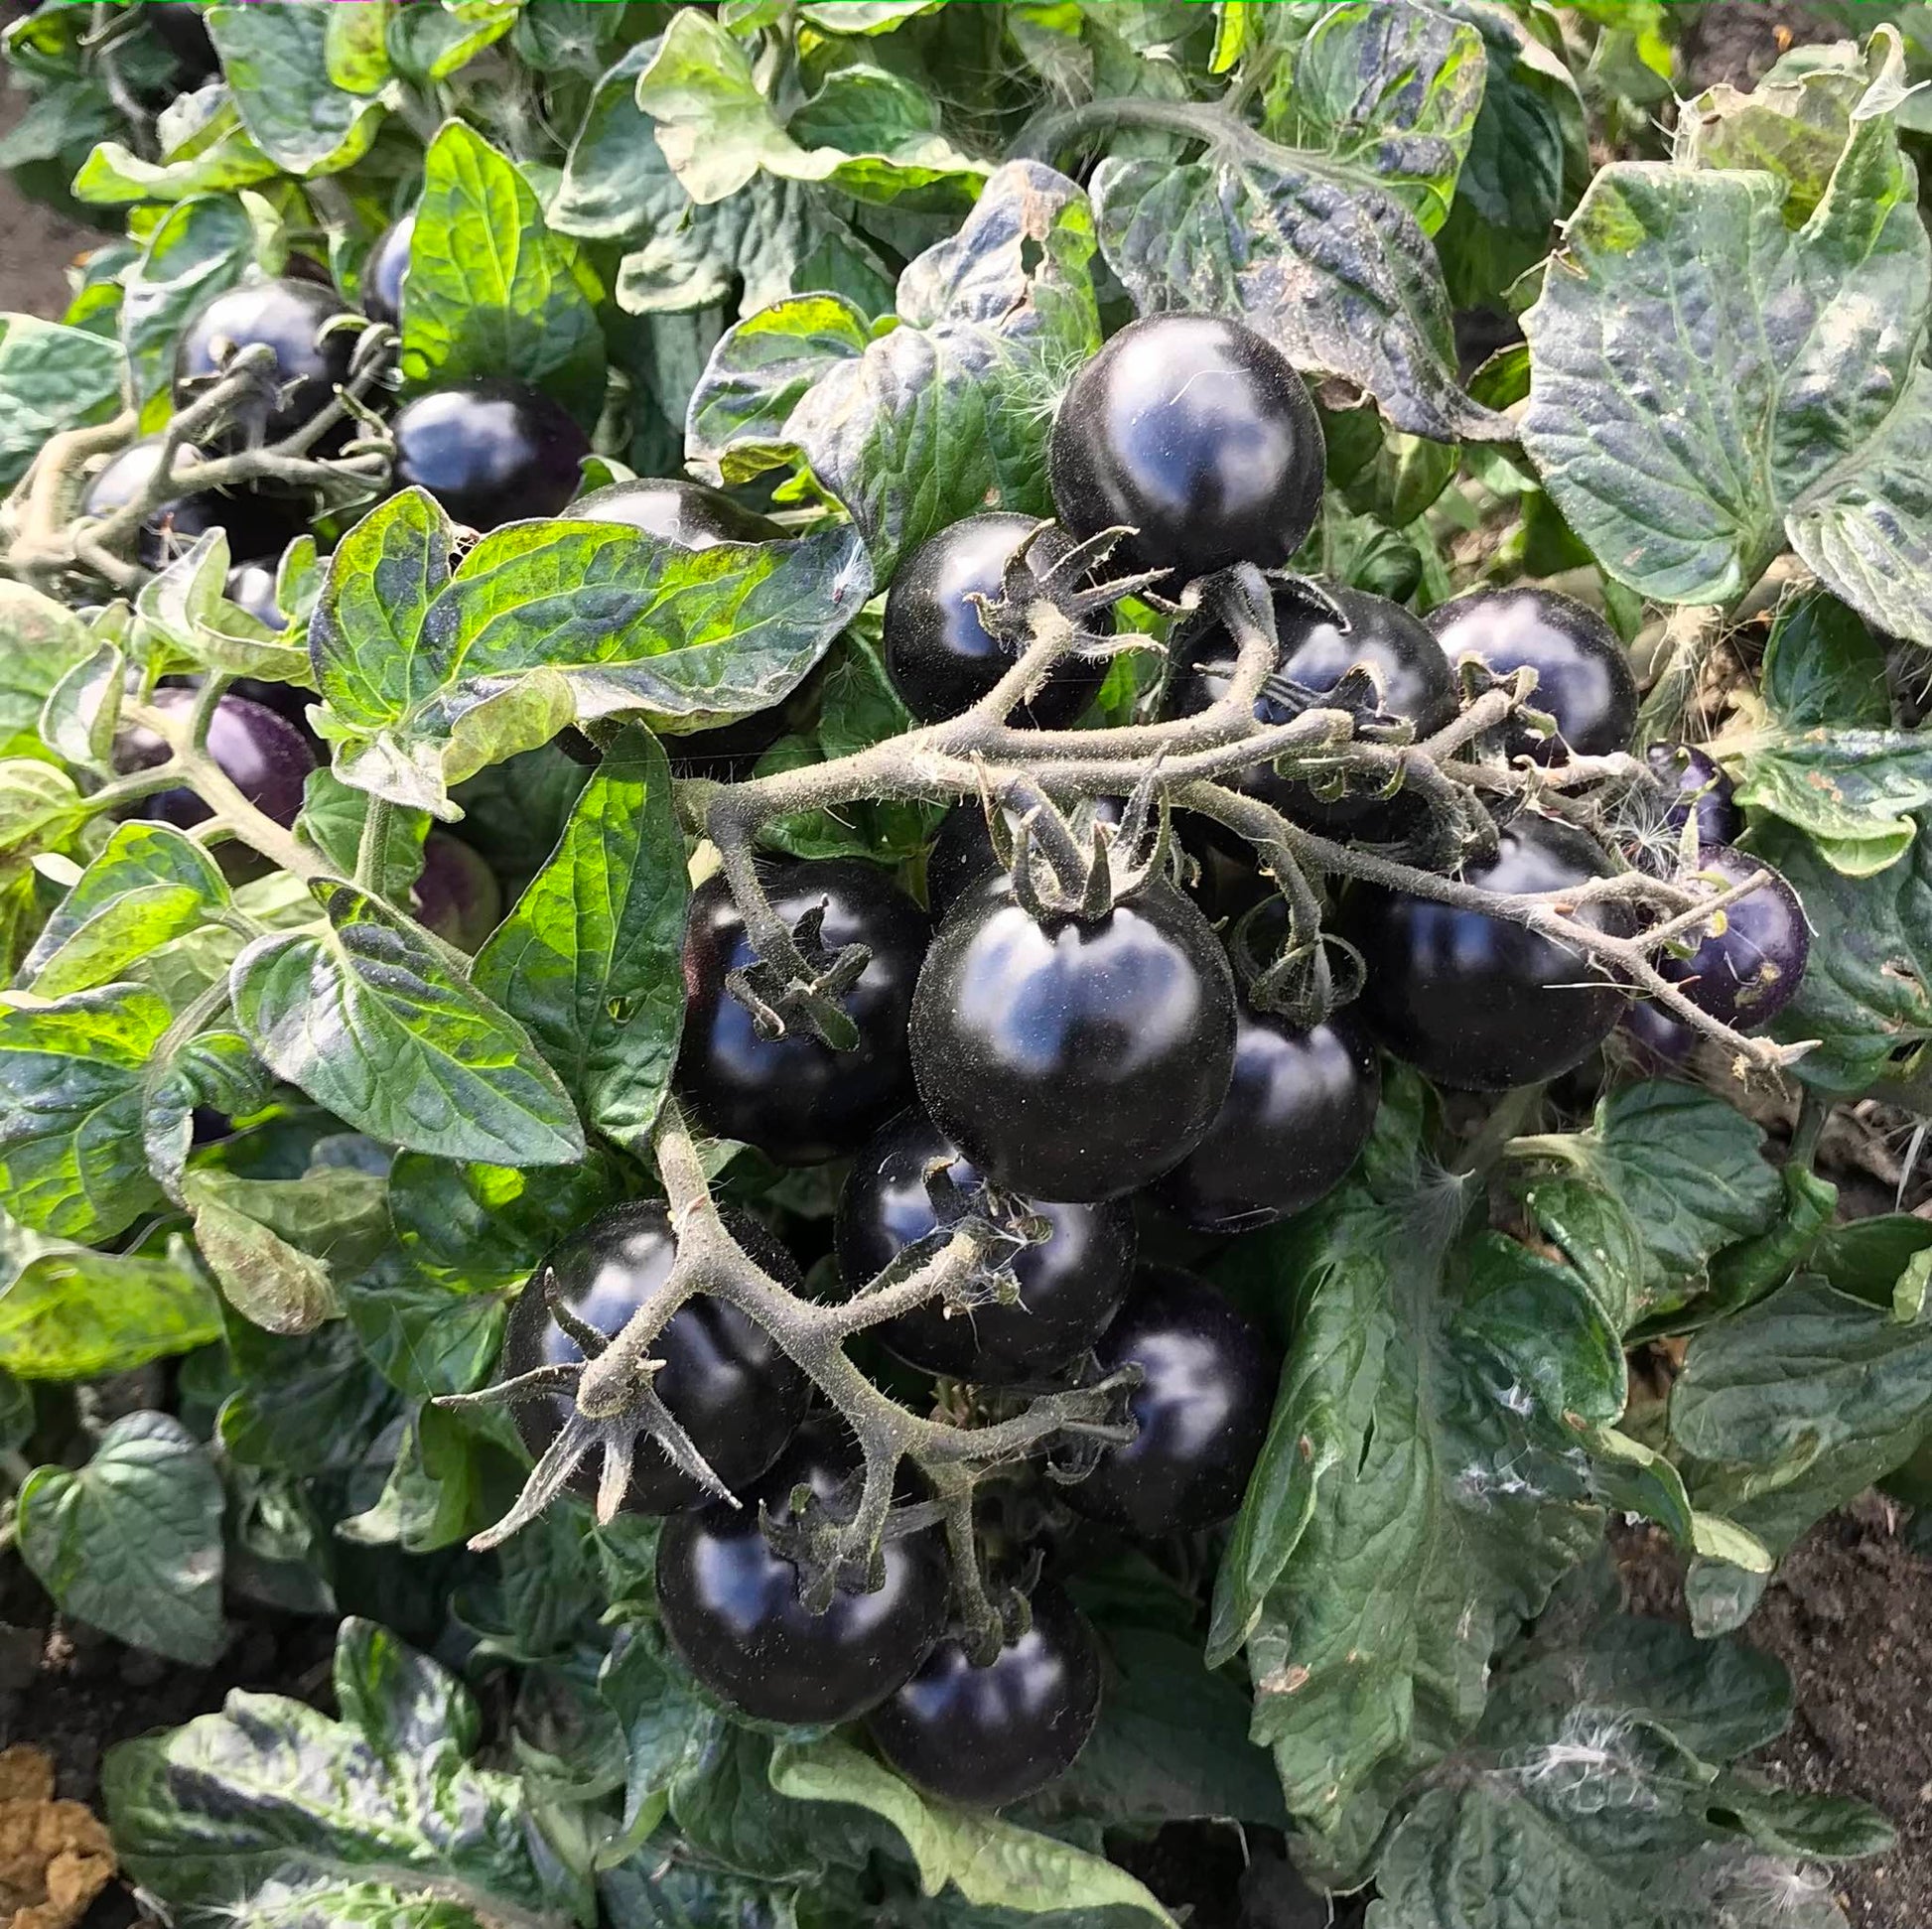 Unripe cherry tomatos with so much anthocyanin colouring they appear black.